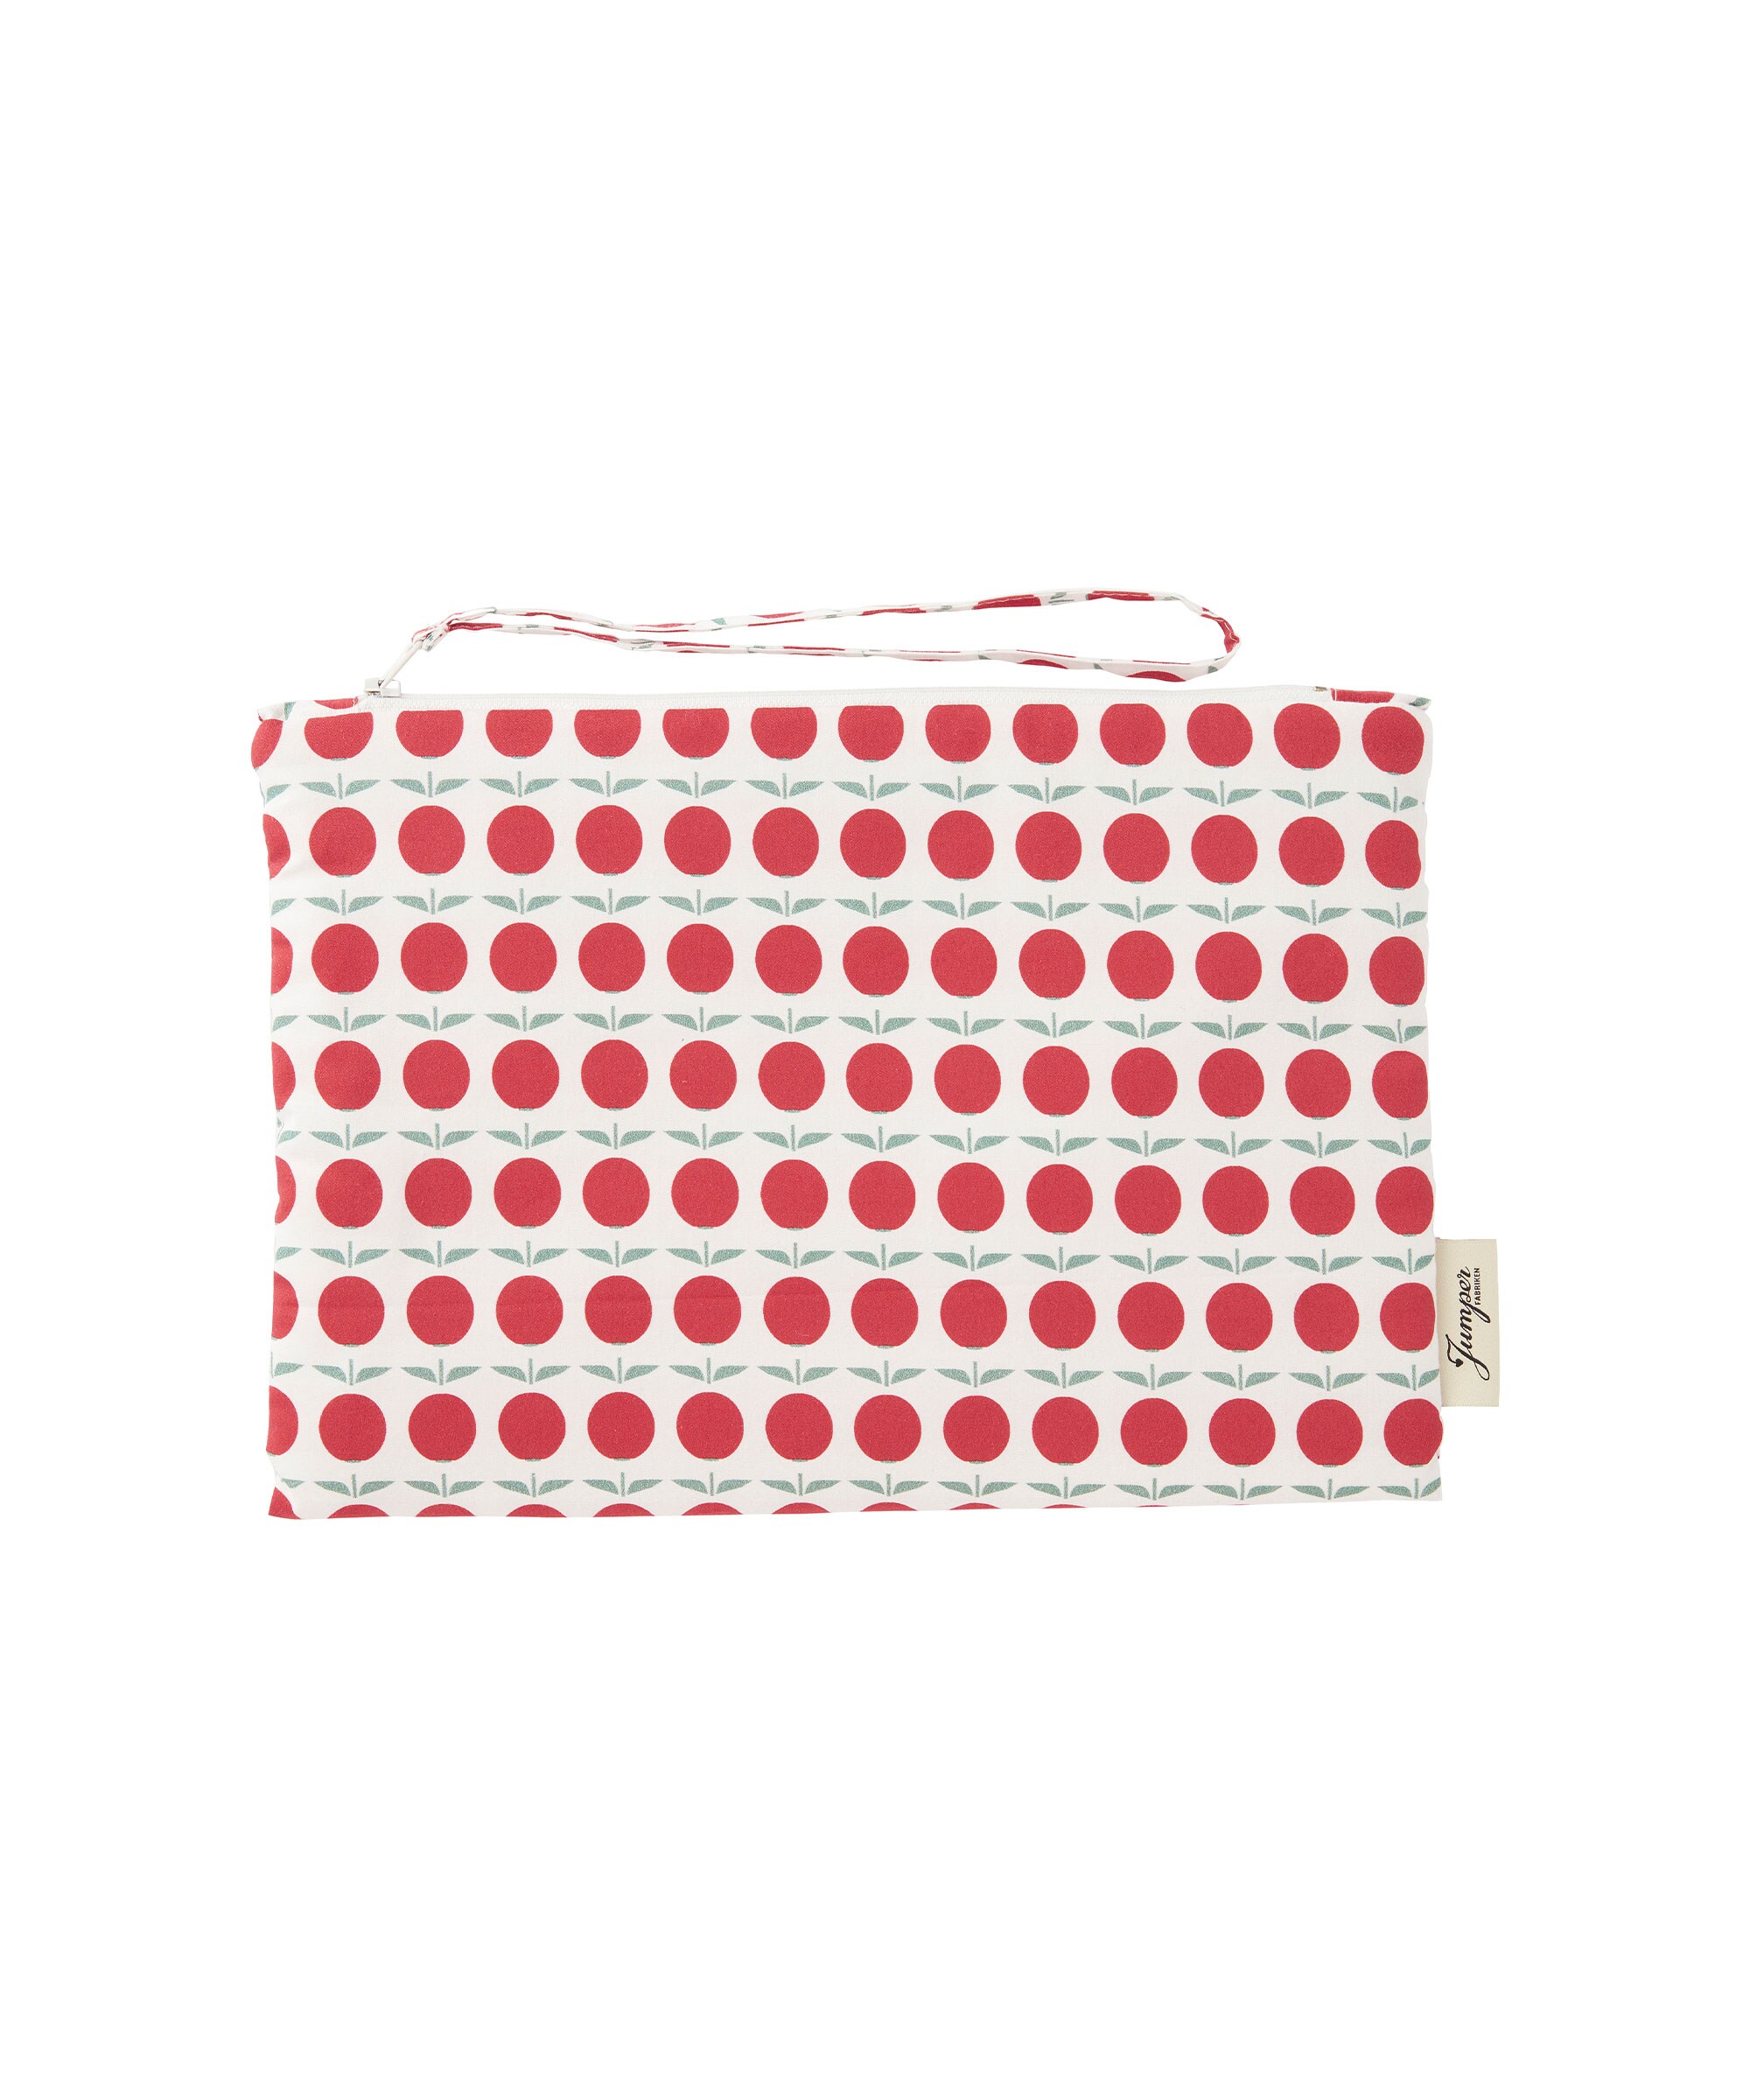 Frankie CosmeticBag Red